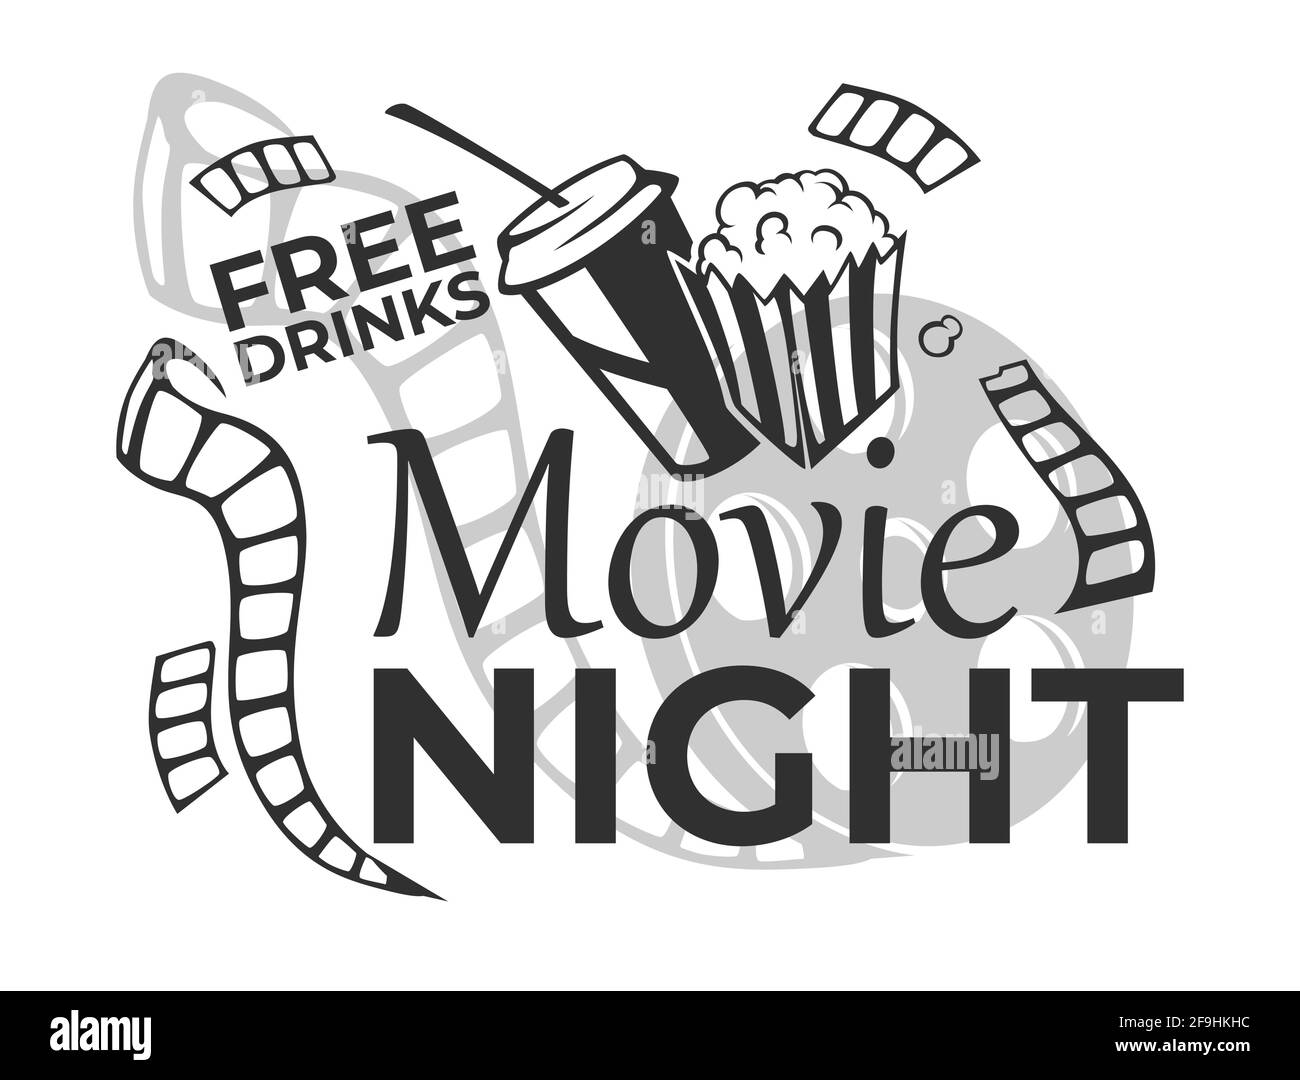 Movie night with free drinks, invitation banner Stock Vector